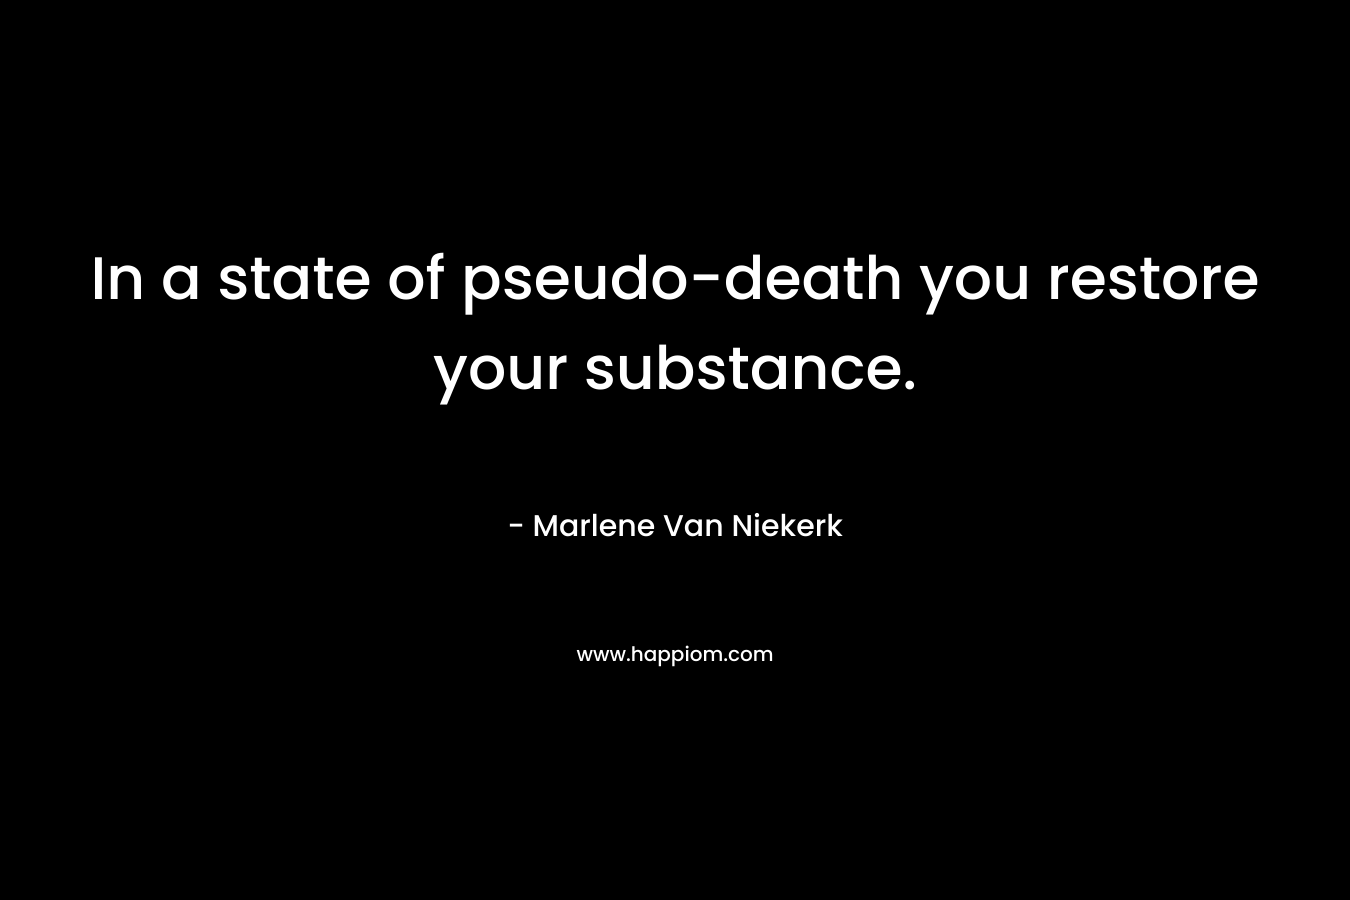 In a state of pseudo-death you restore your substance.